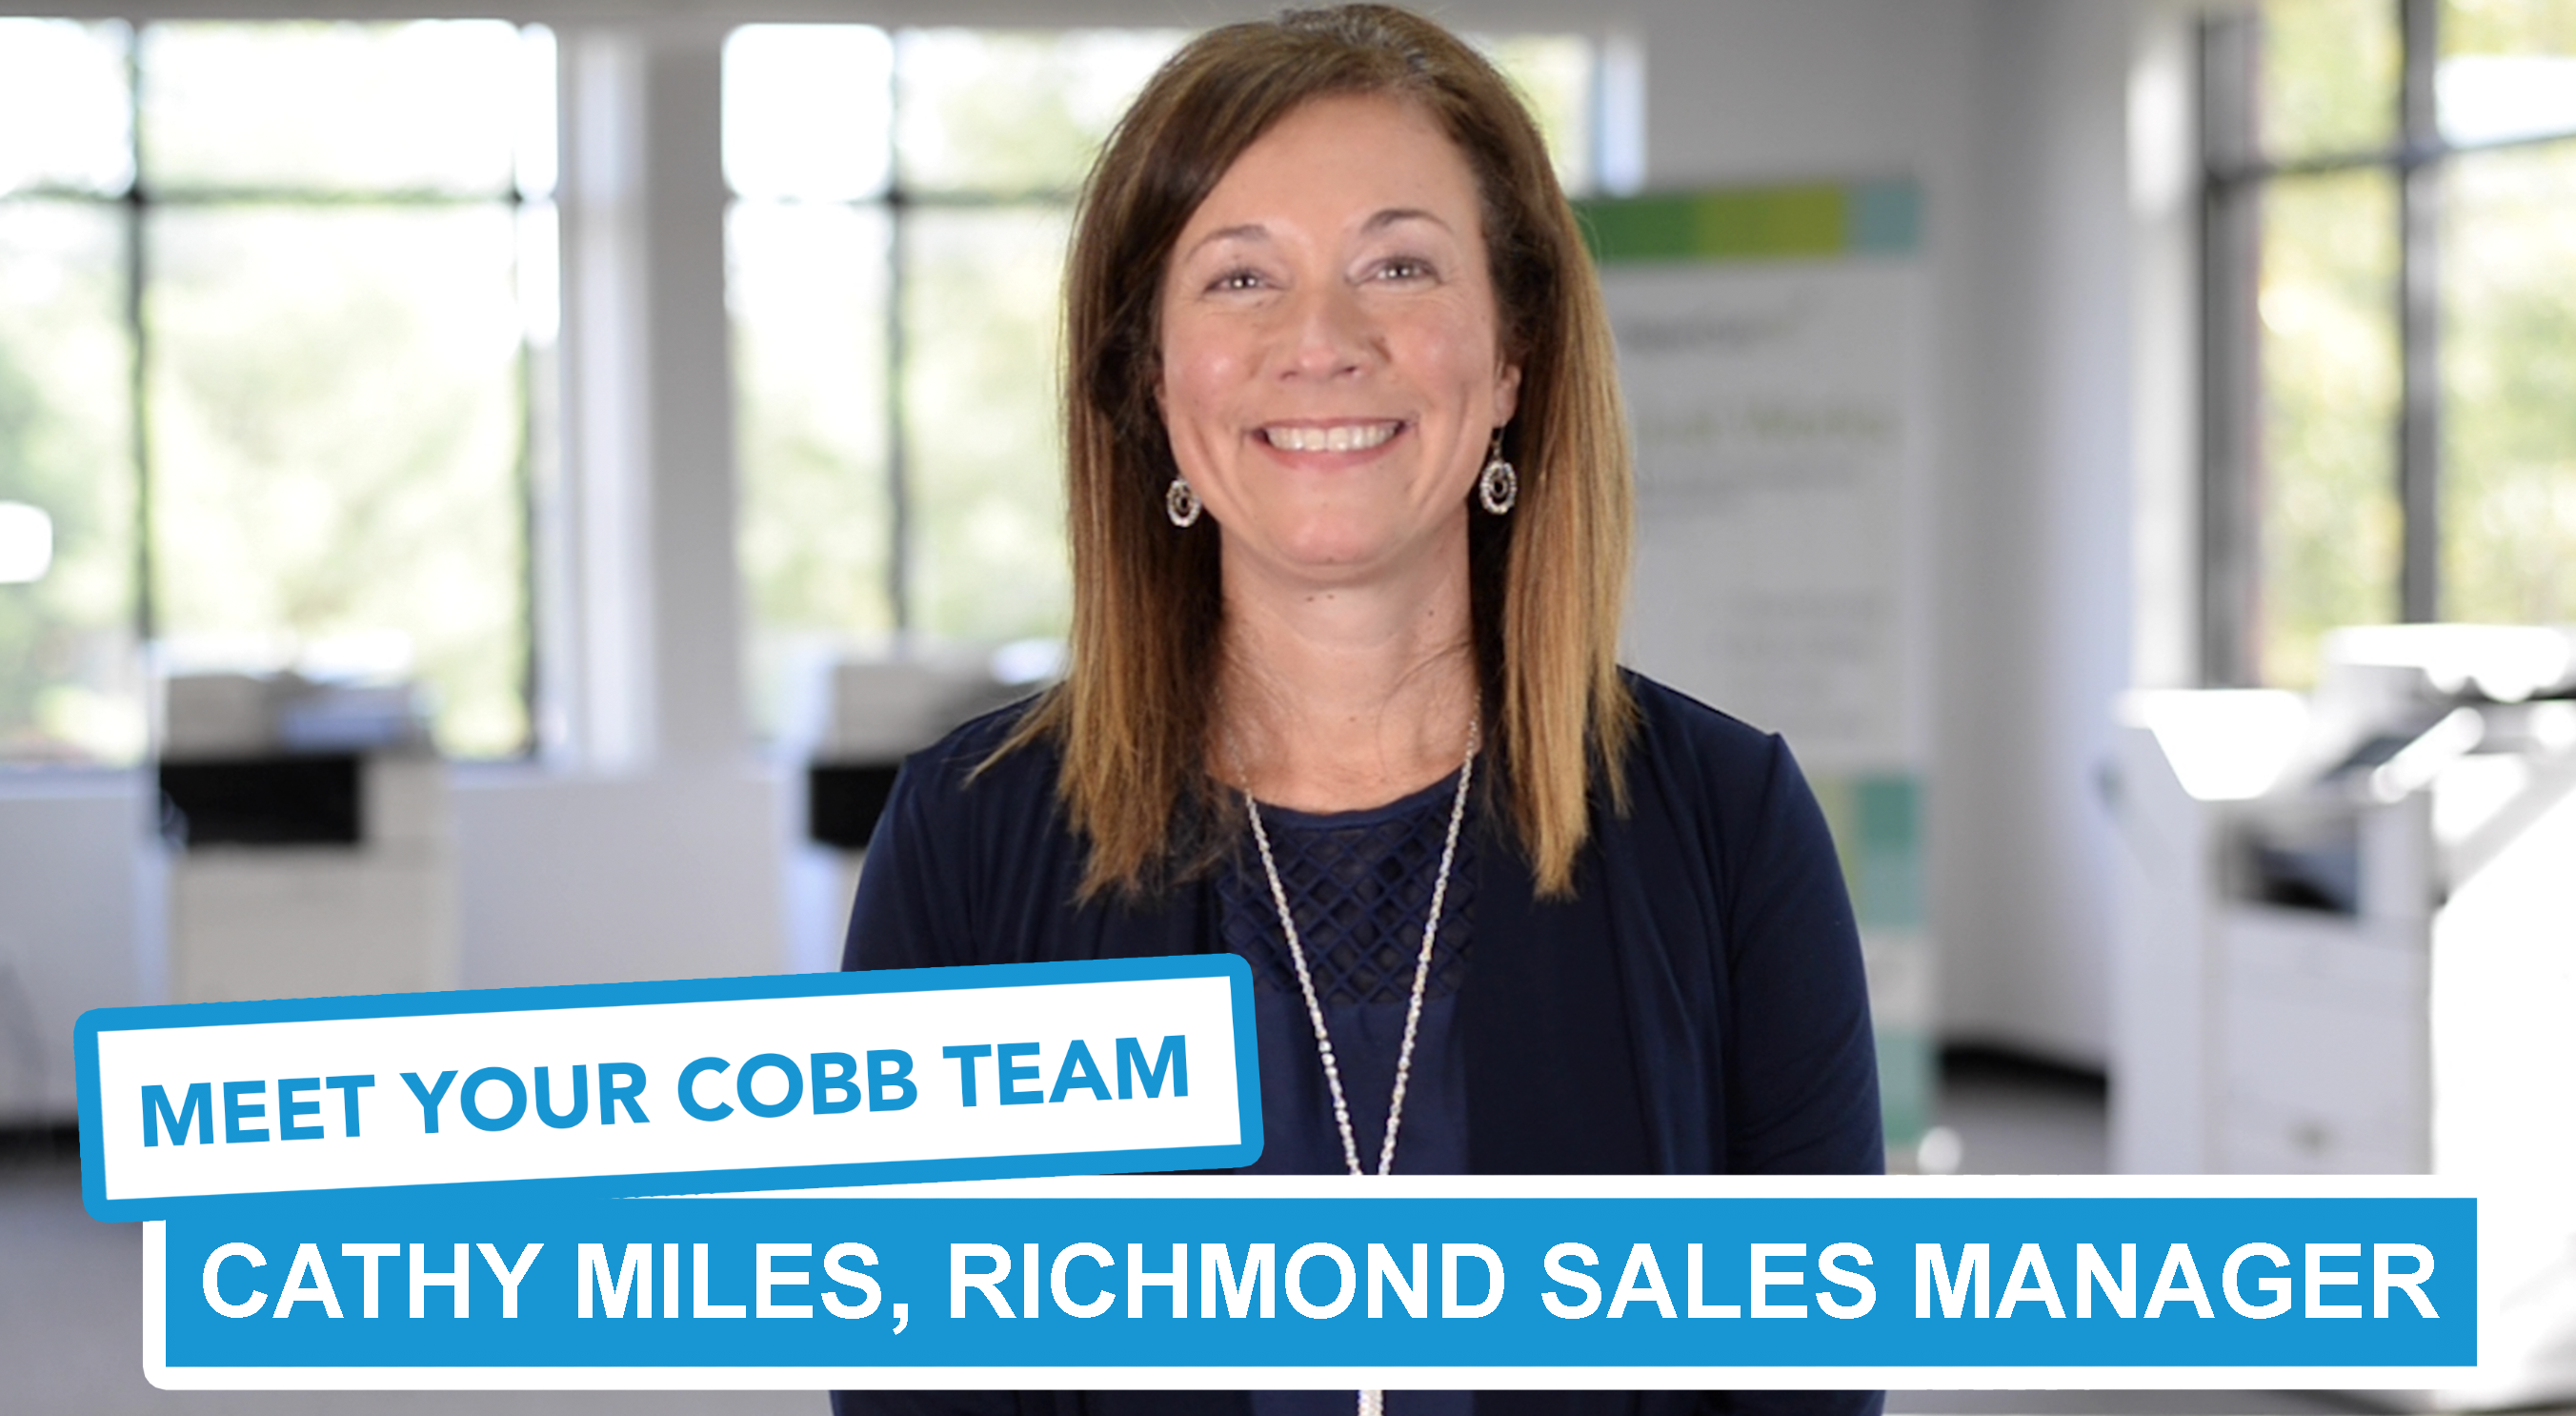 Meet Your Cobb Team: Cathy Miles, Richmond Sales Manager